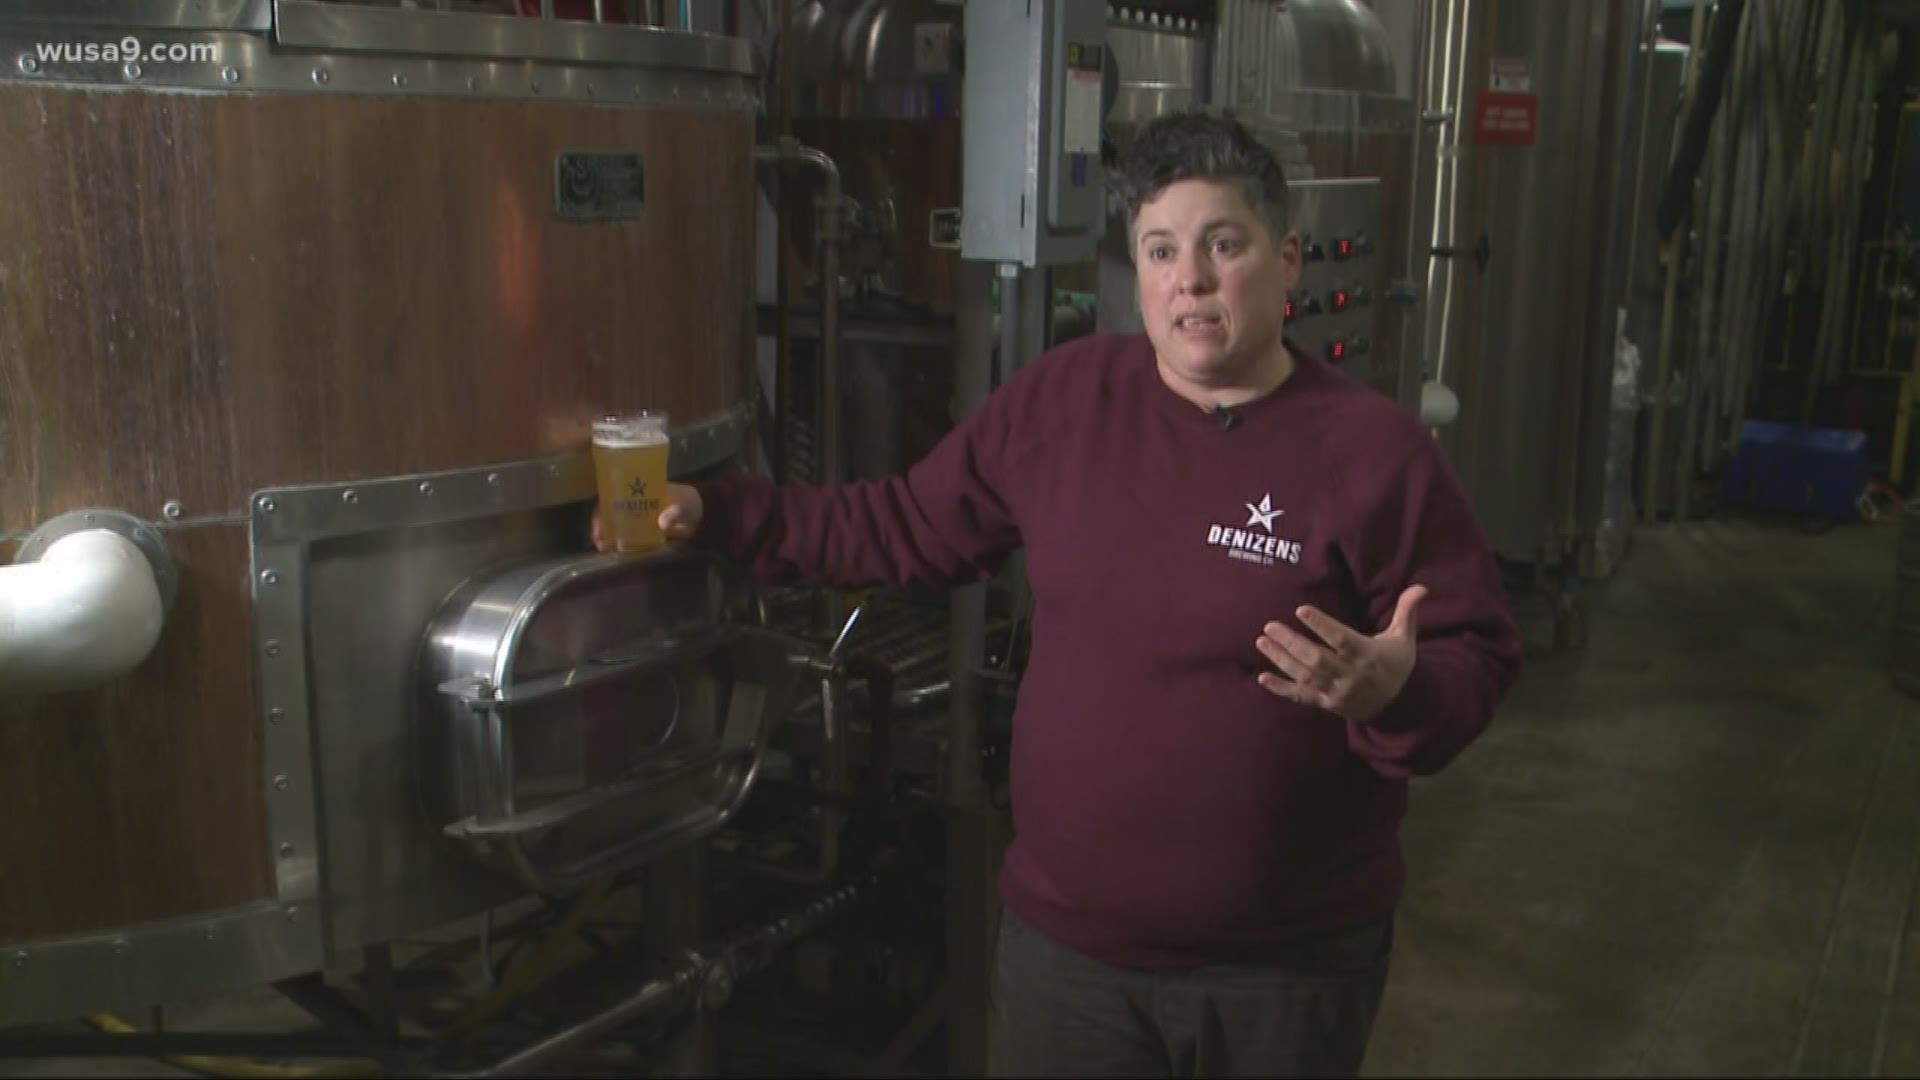 March is Women's History Month and to celebrate, Multimedia Journalist Eric Jansen takes us to Denizens Brewery in Silver Spring, Md.